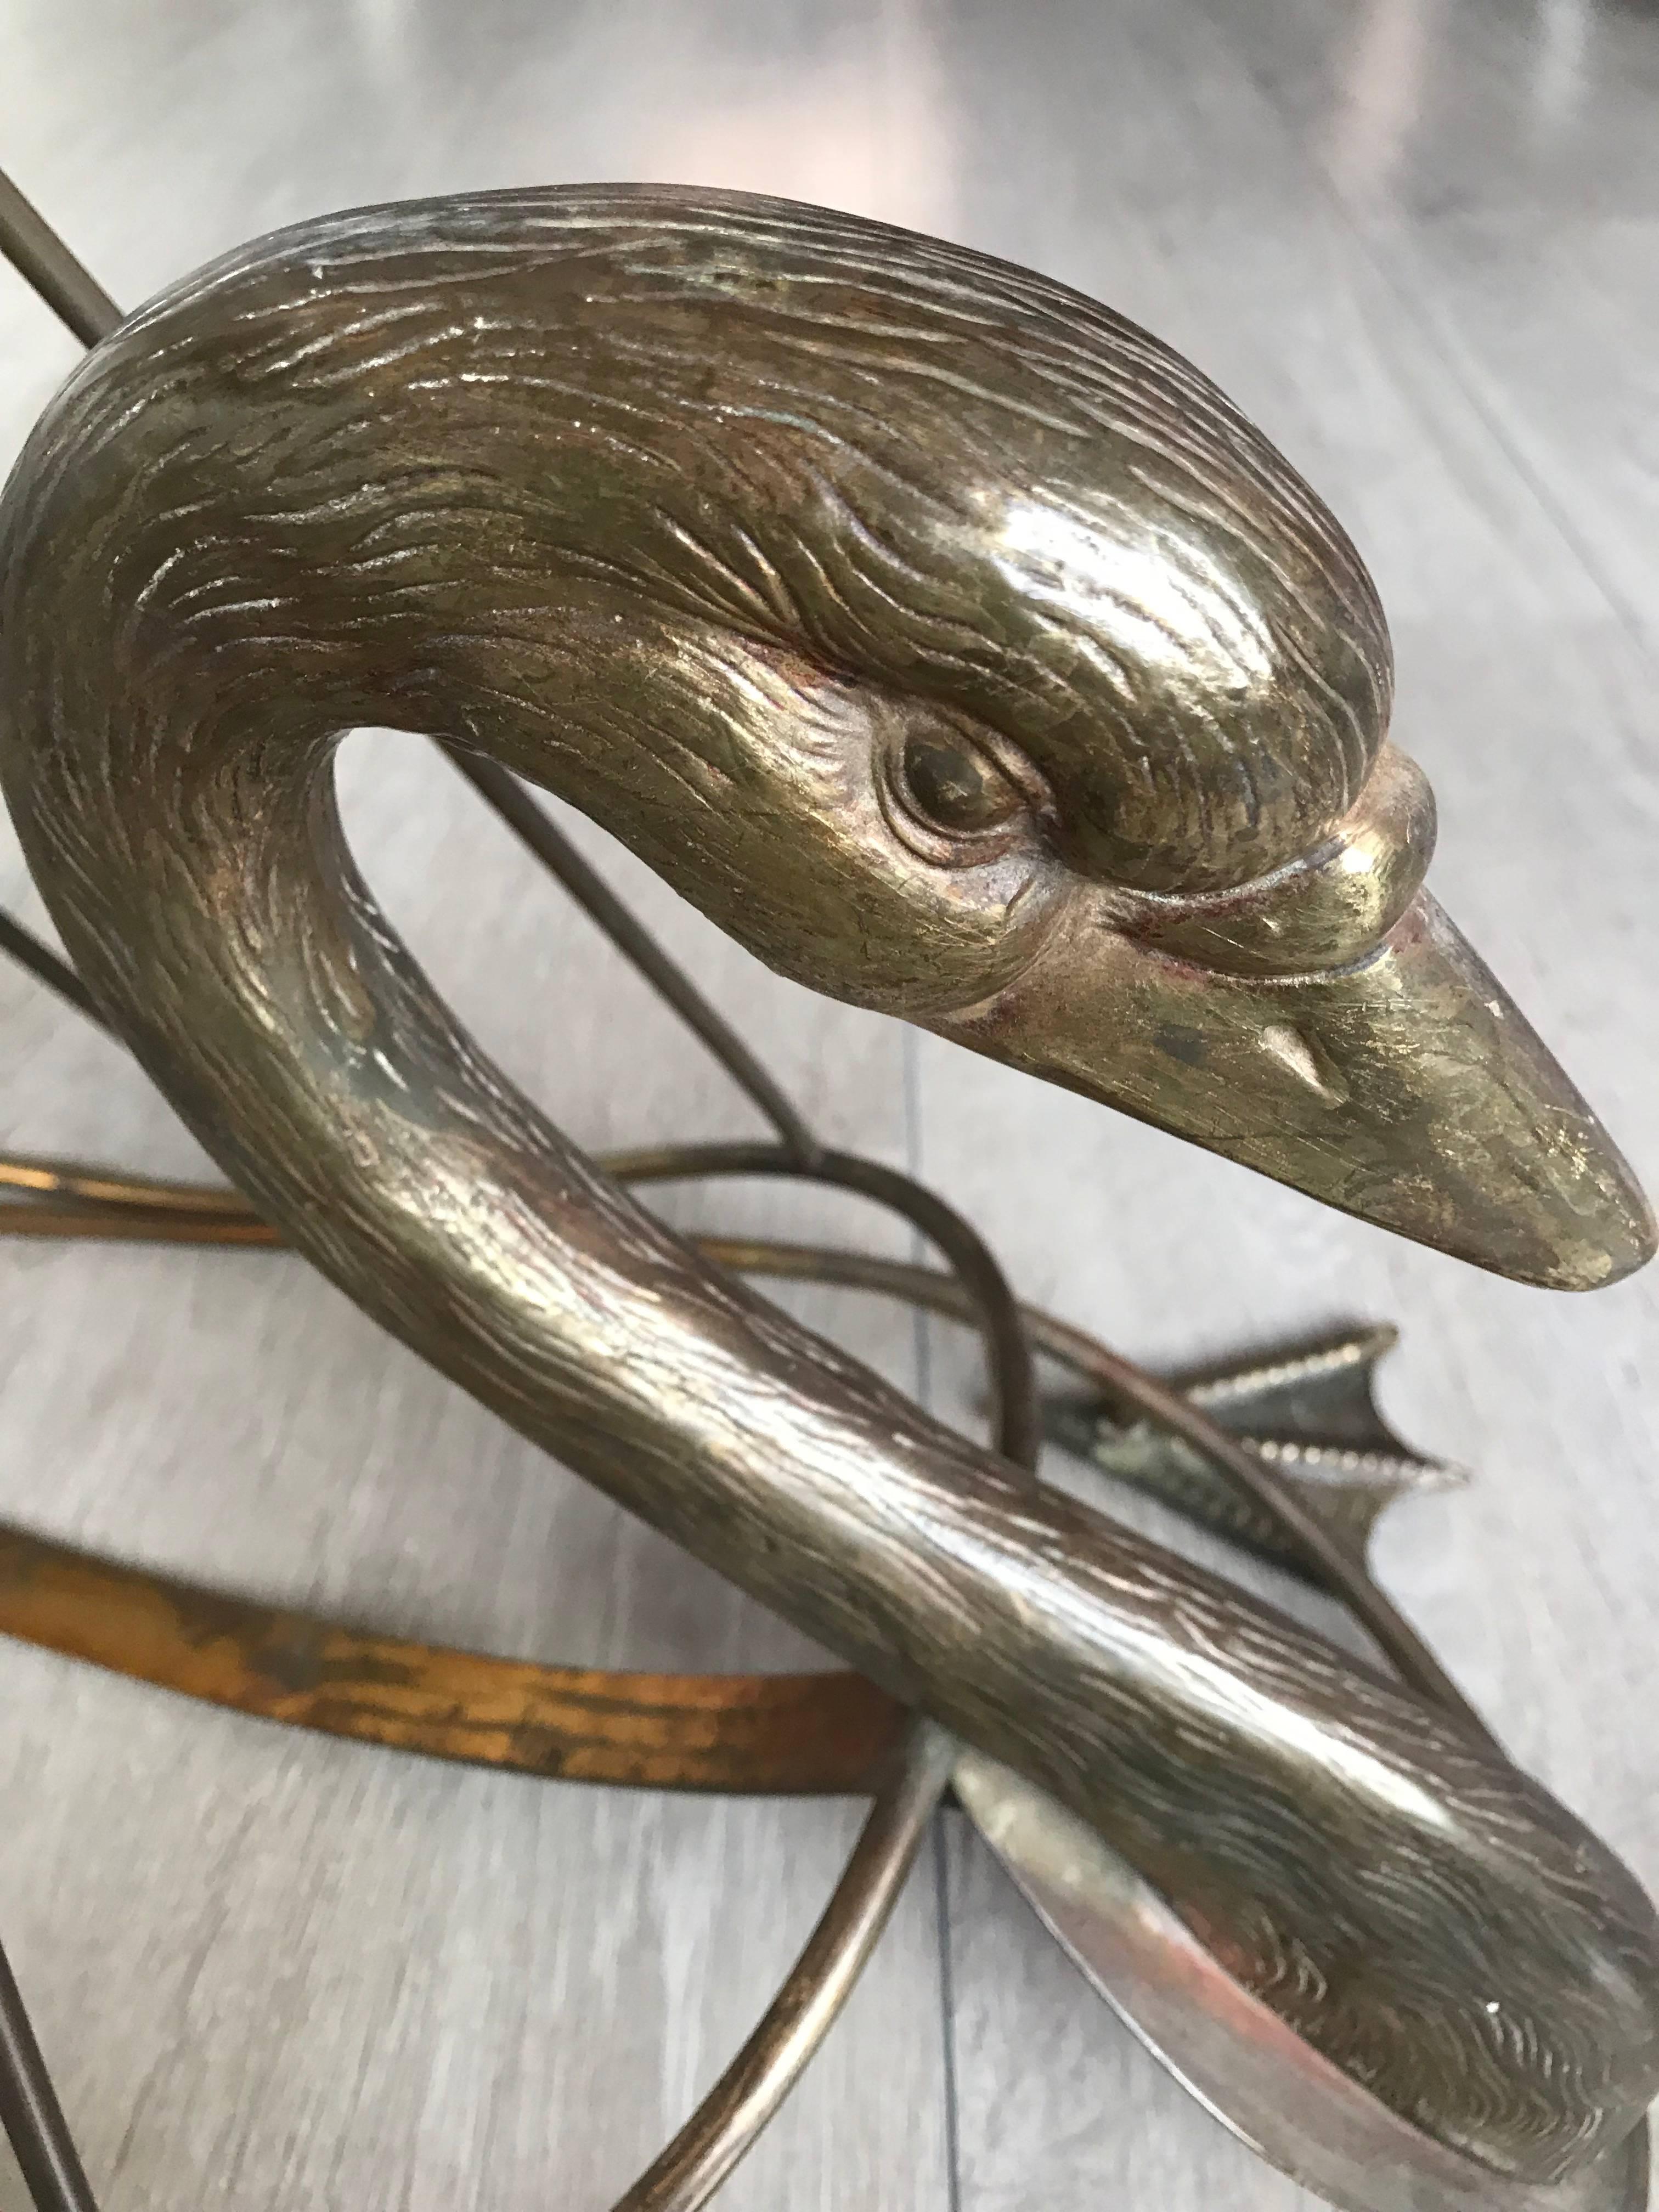 Wonderfully sculptural brass magazine stand by Maison Jansen.

This practical size and highly decorative swan magazine rack is in excellent condition and it is exactly what you would expect from the mid-century designers of Maison Jansen. Both the